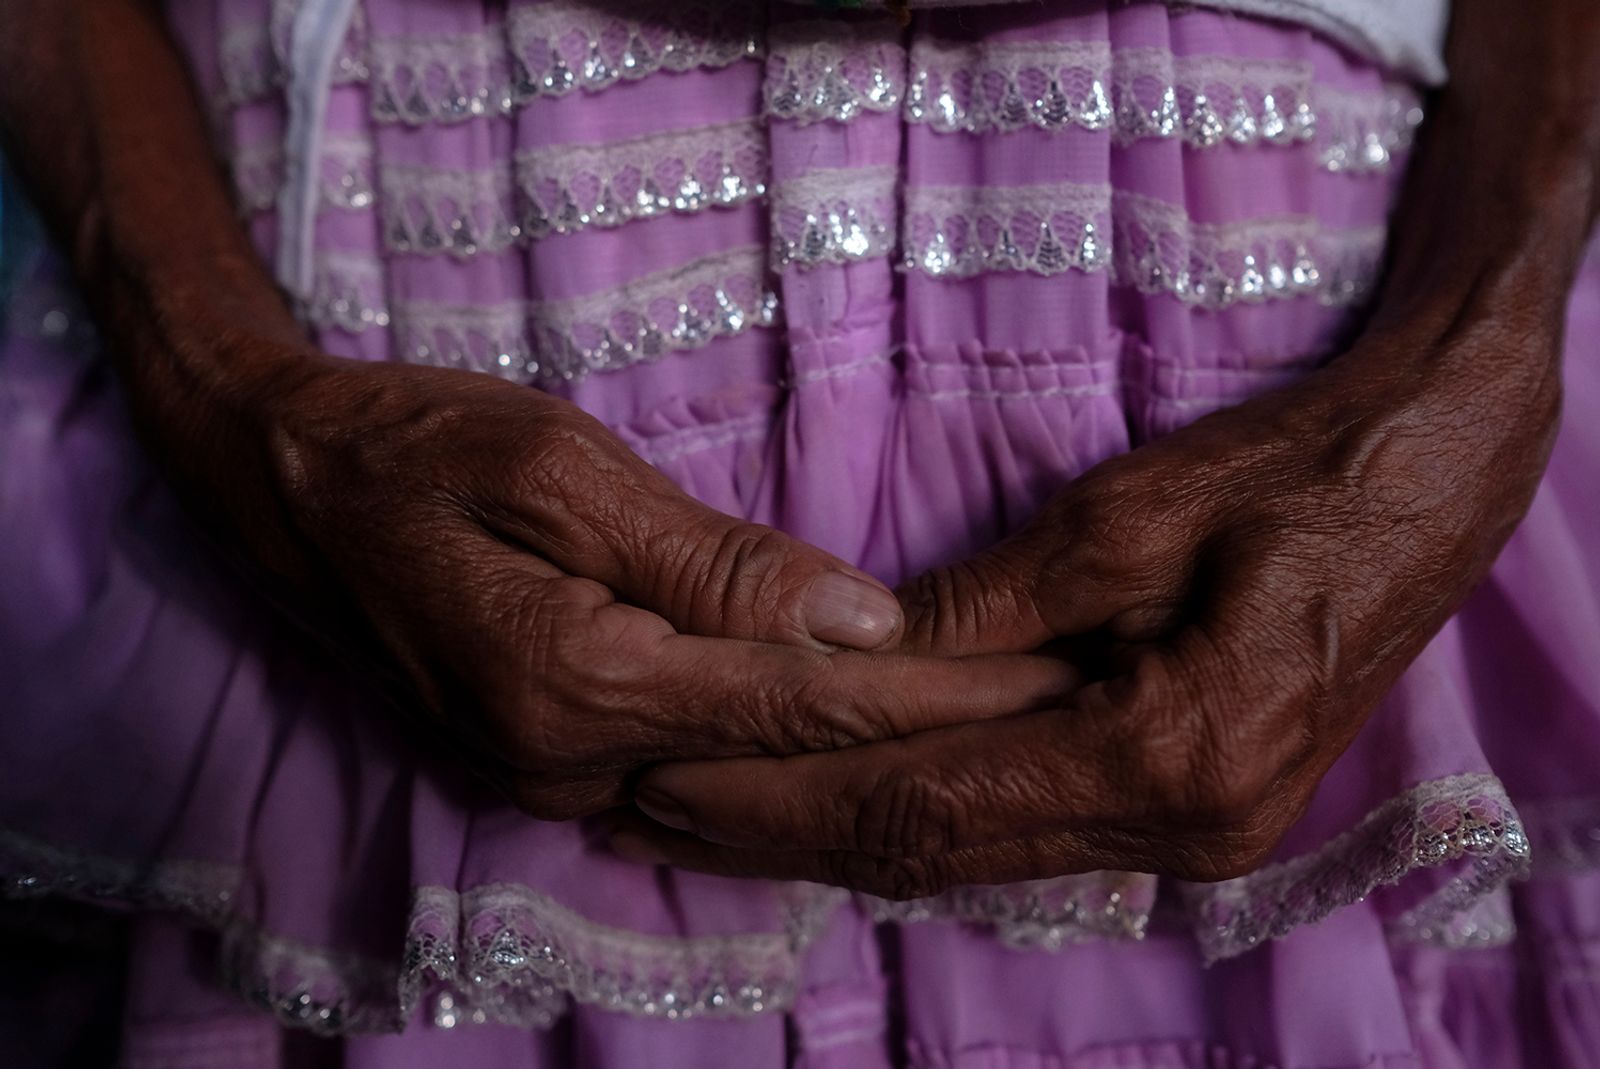 © Tania Barrientos - The hands of Francisca, a Mixteco midwife